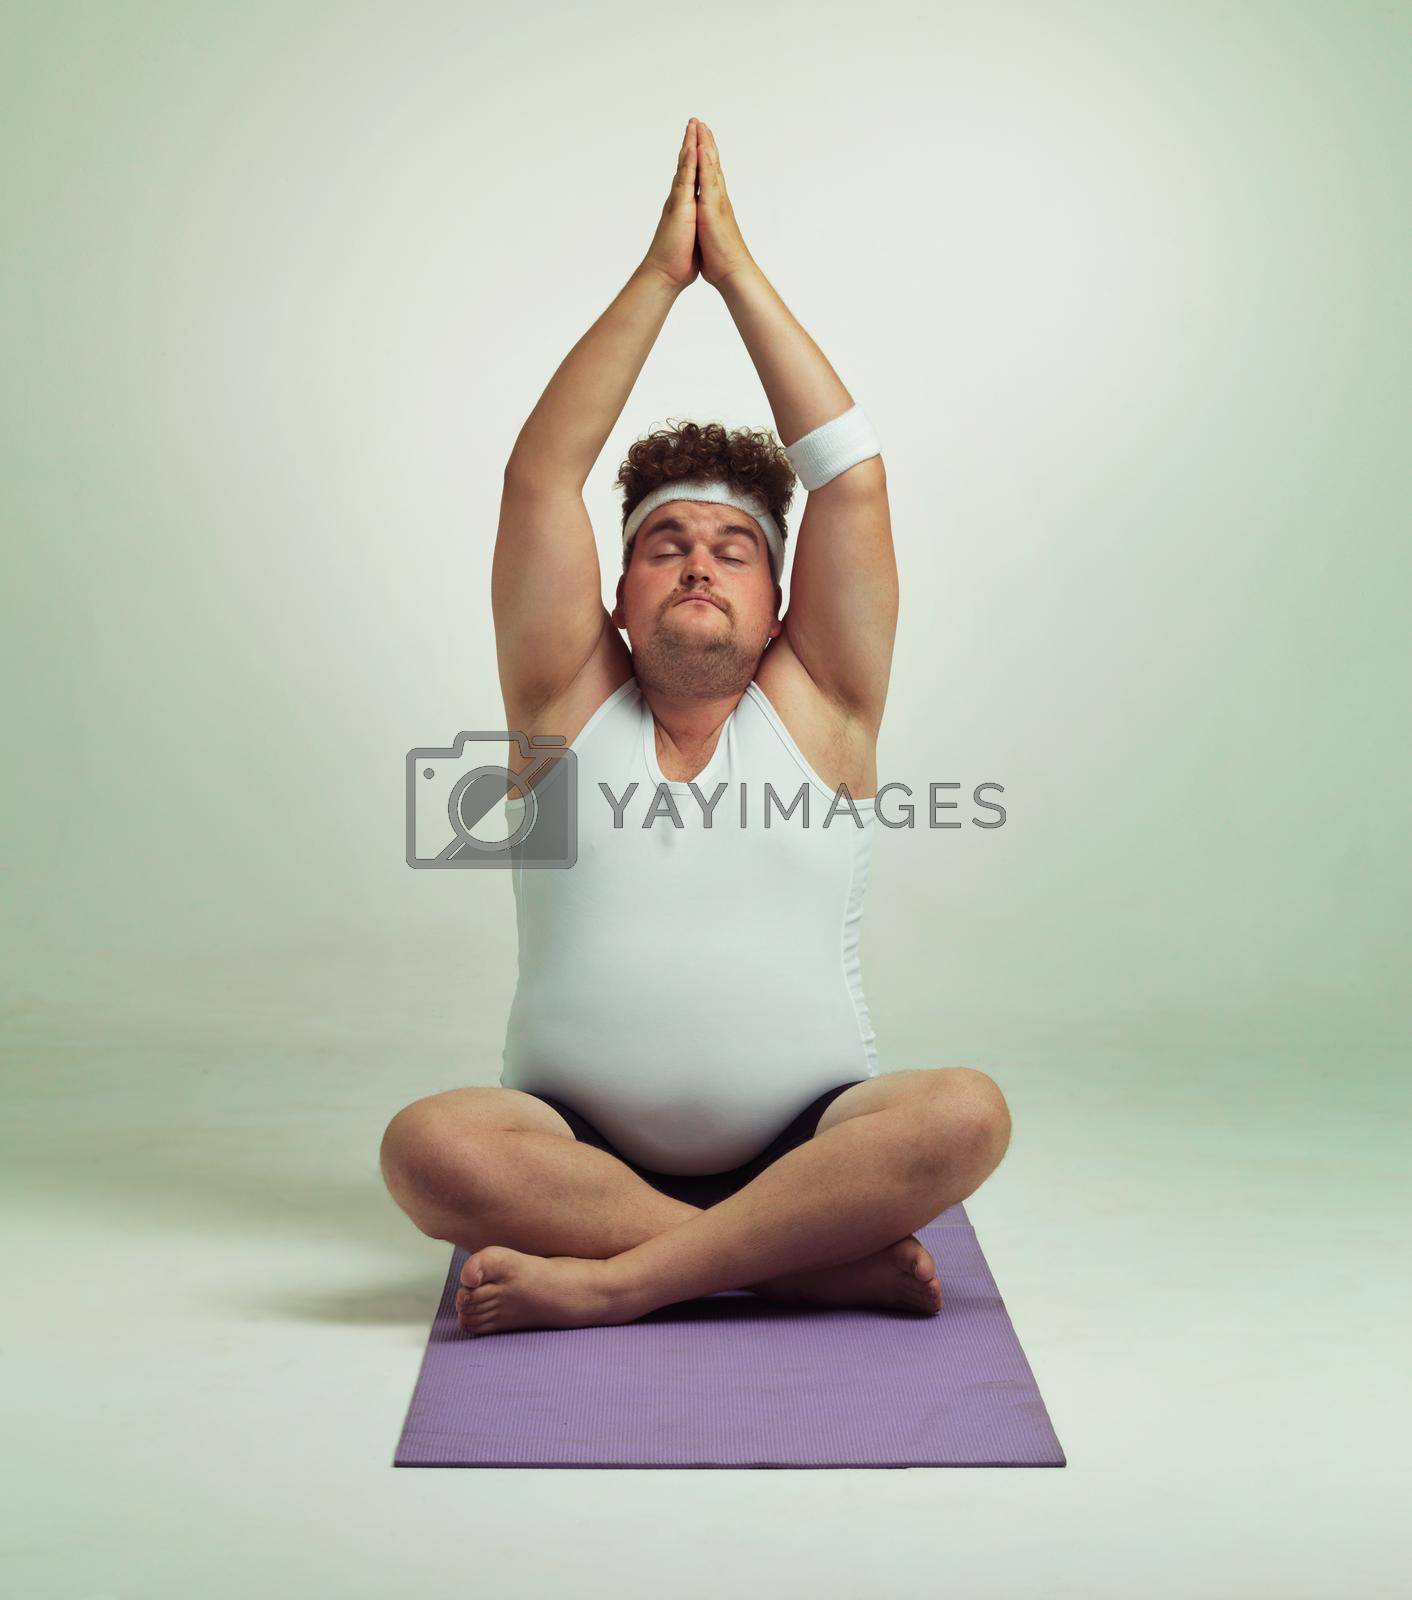 Being fit is easy especially with yoga. An overweight man doing a yoga pose